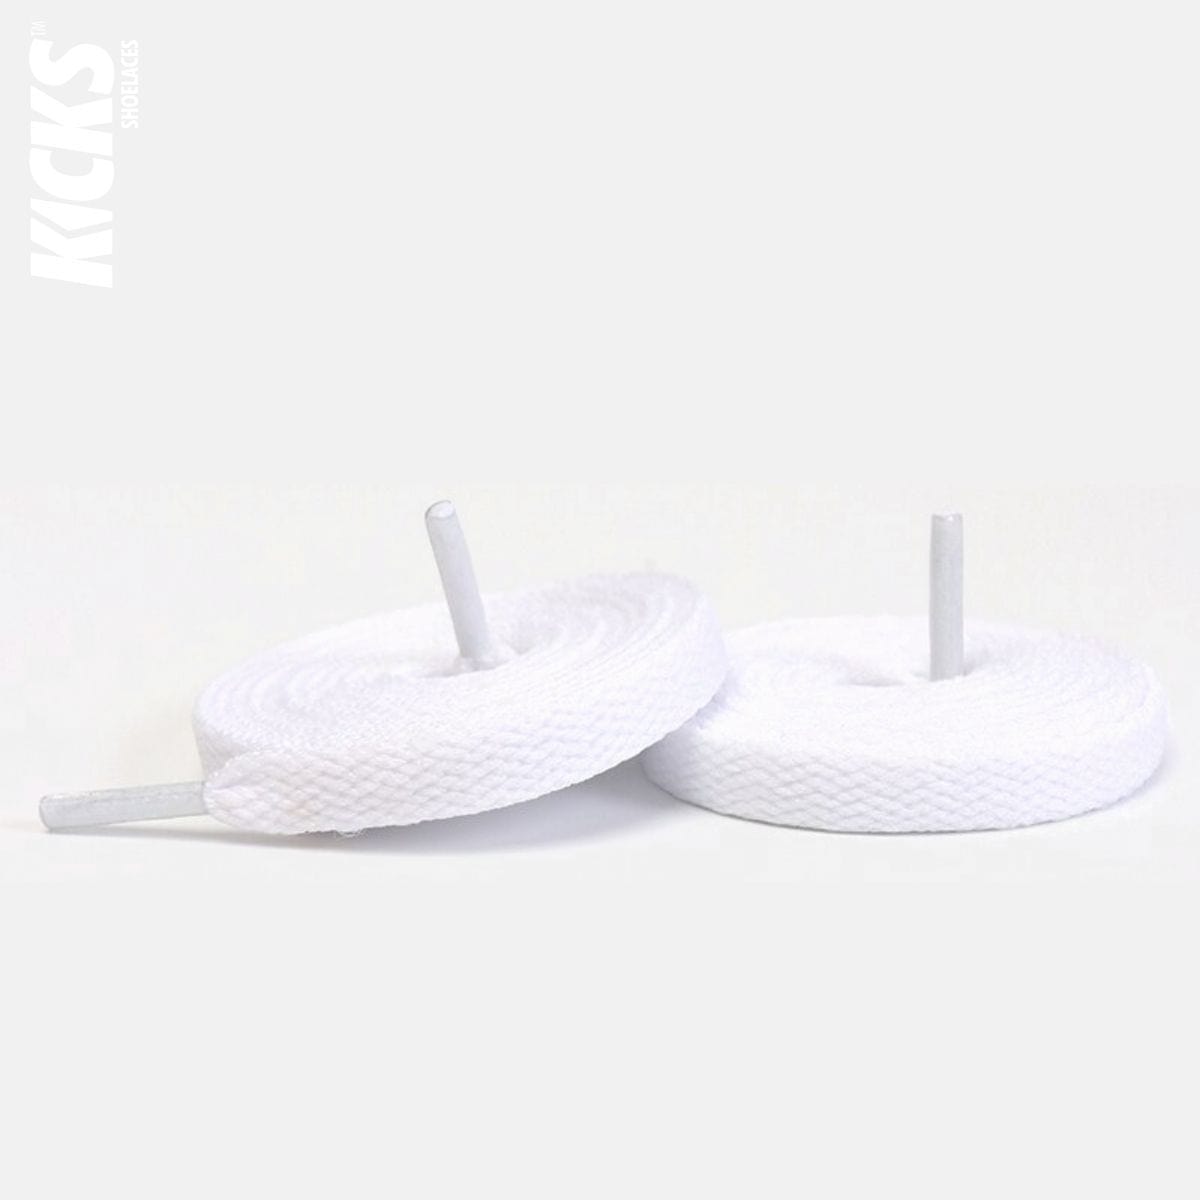 Nike Air Max Replacement Shoelaces